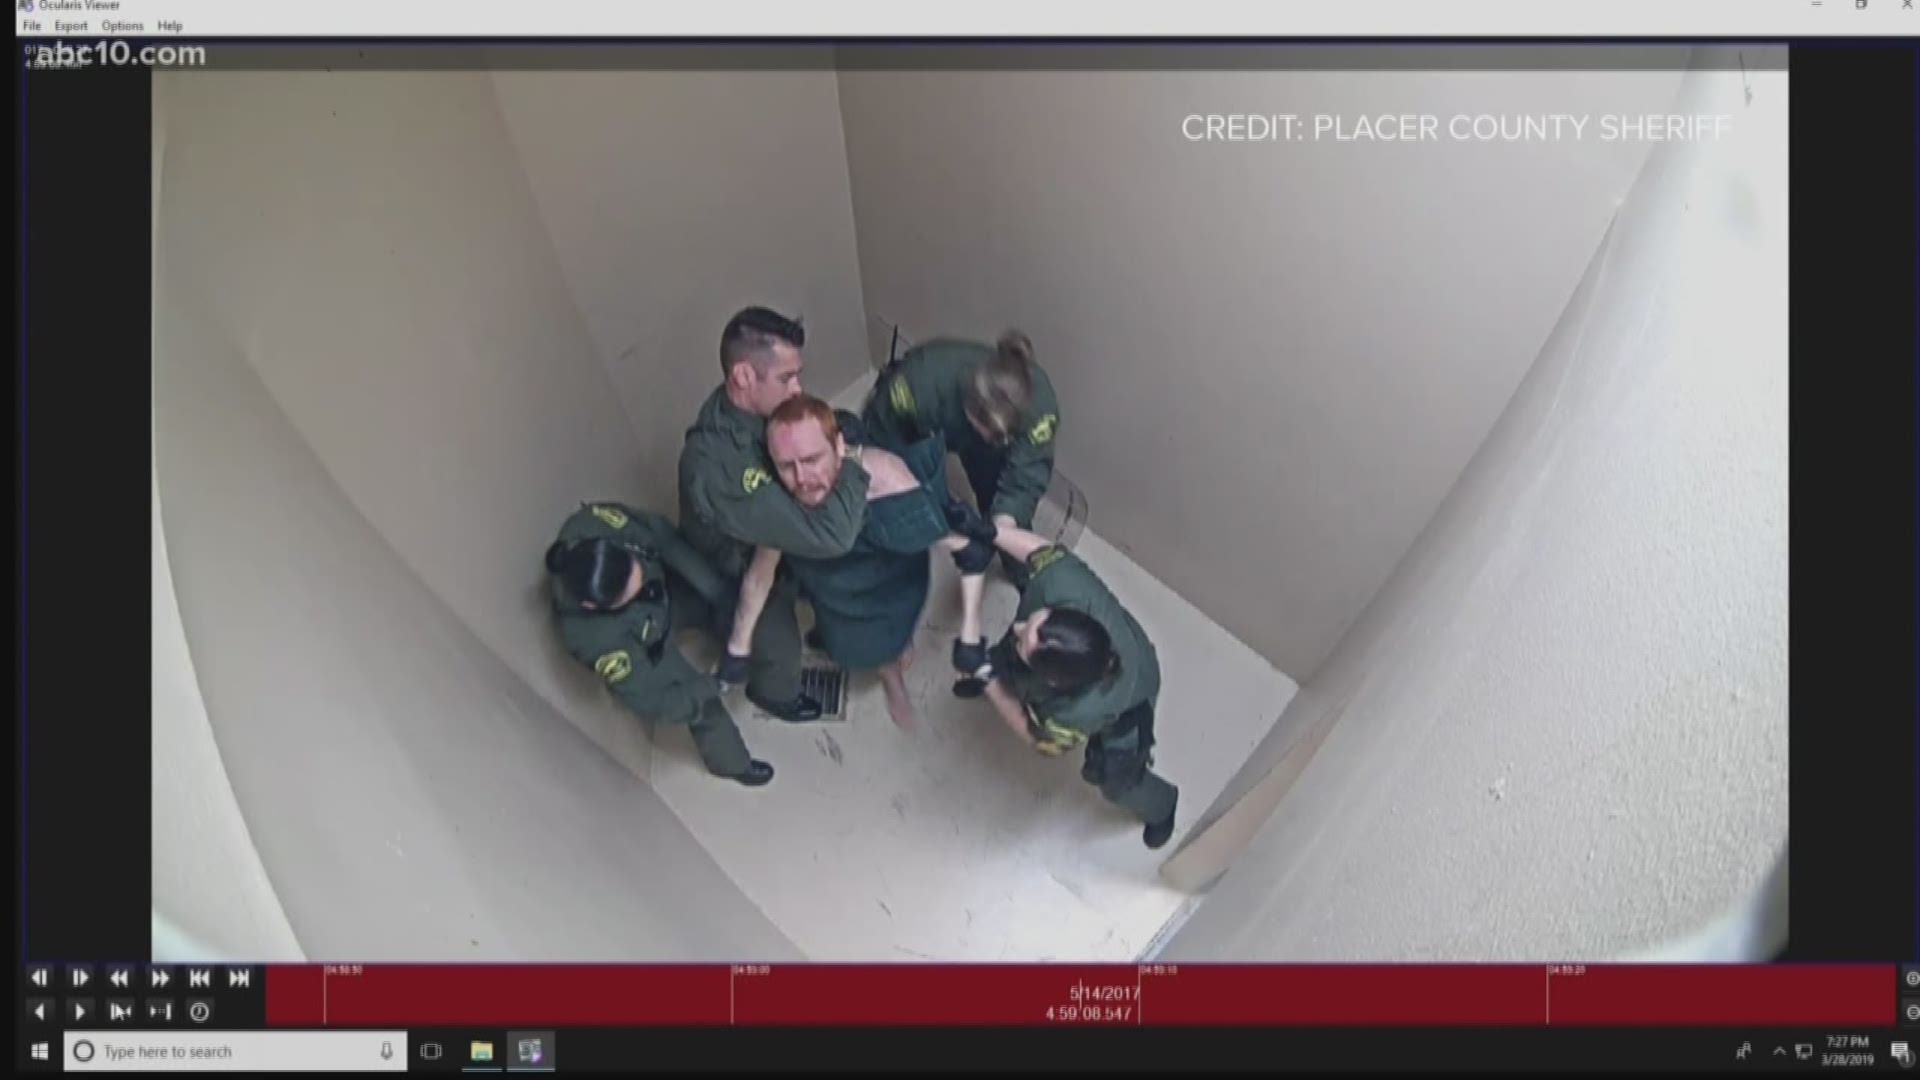 Newly released video shows Auburn Jail staff beating an inmate in an empty cell back in 2017. The video shows deputies slam inmate Beau Bangert against the wall of a cell using a plastic body shield before punching and tasing him repeatedly.